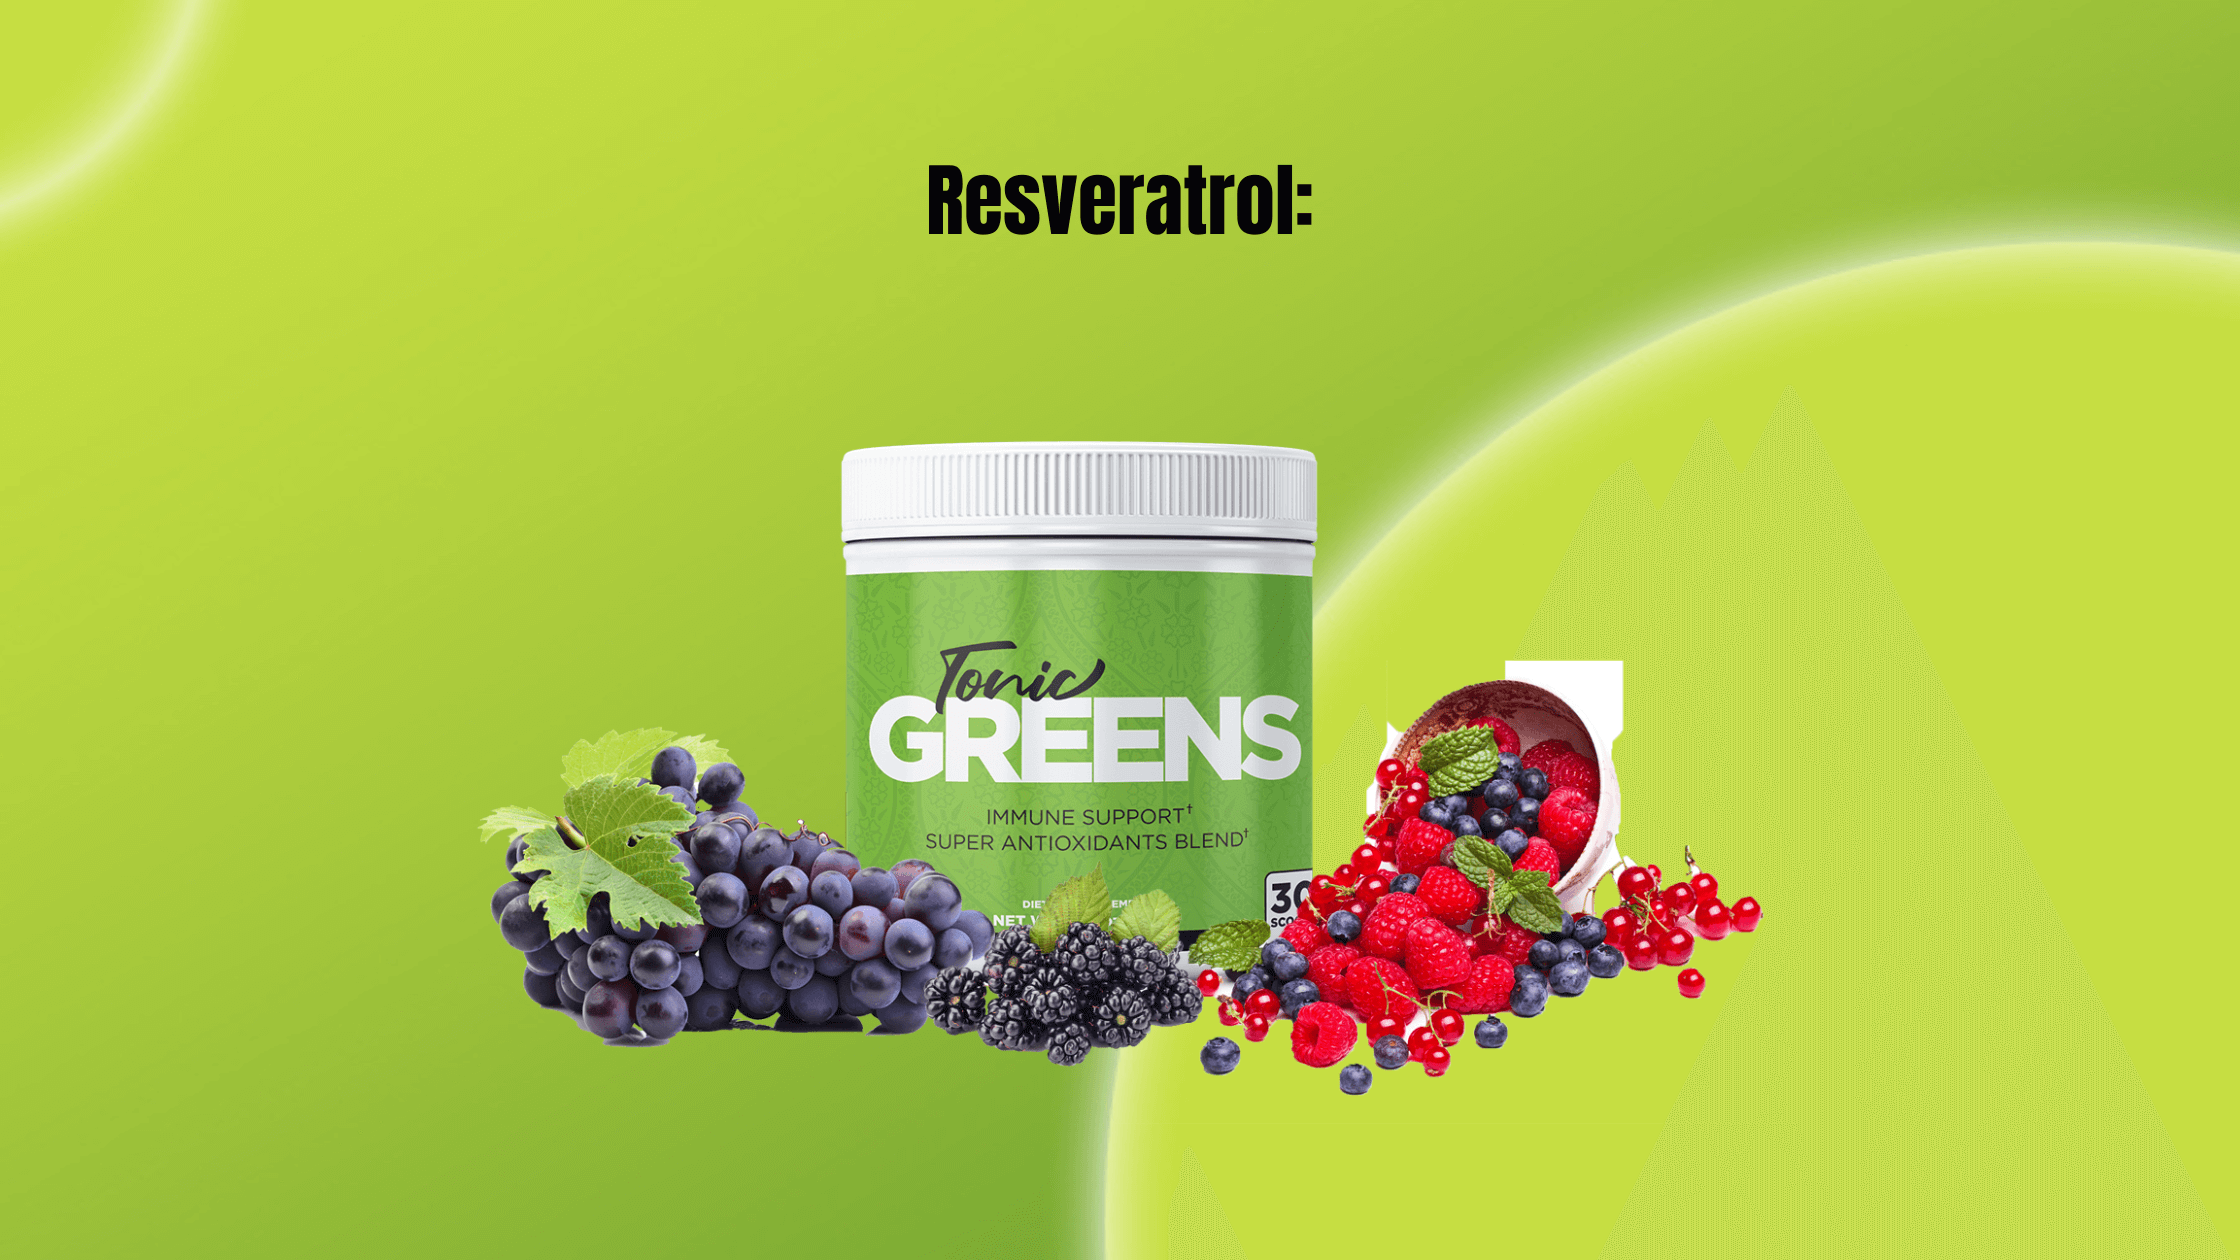 The special mix of potent RESVERATROL